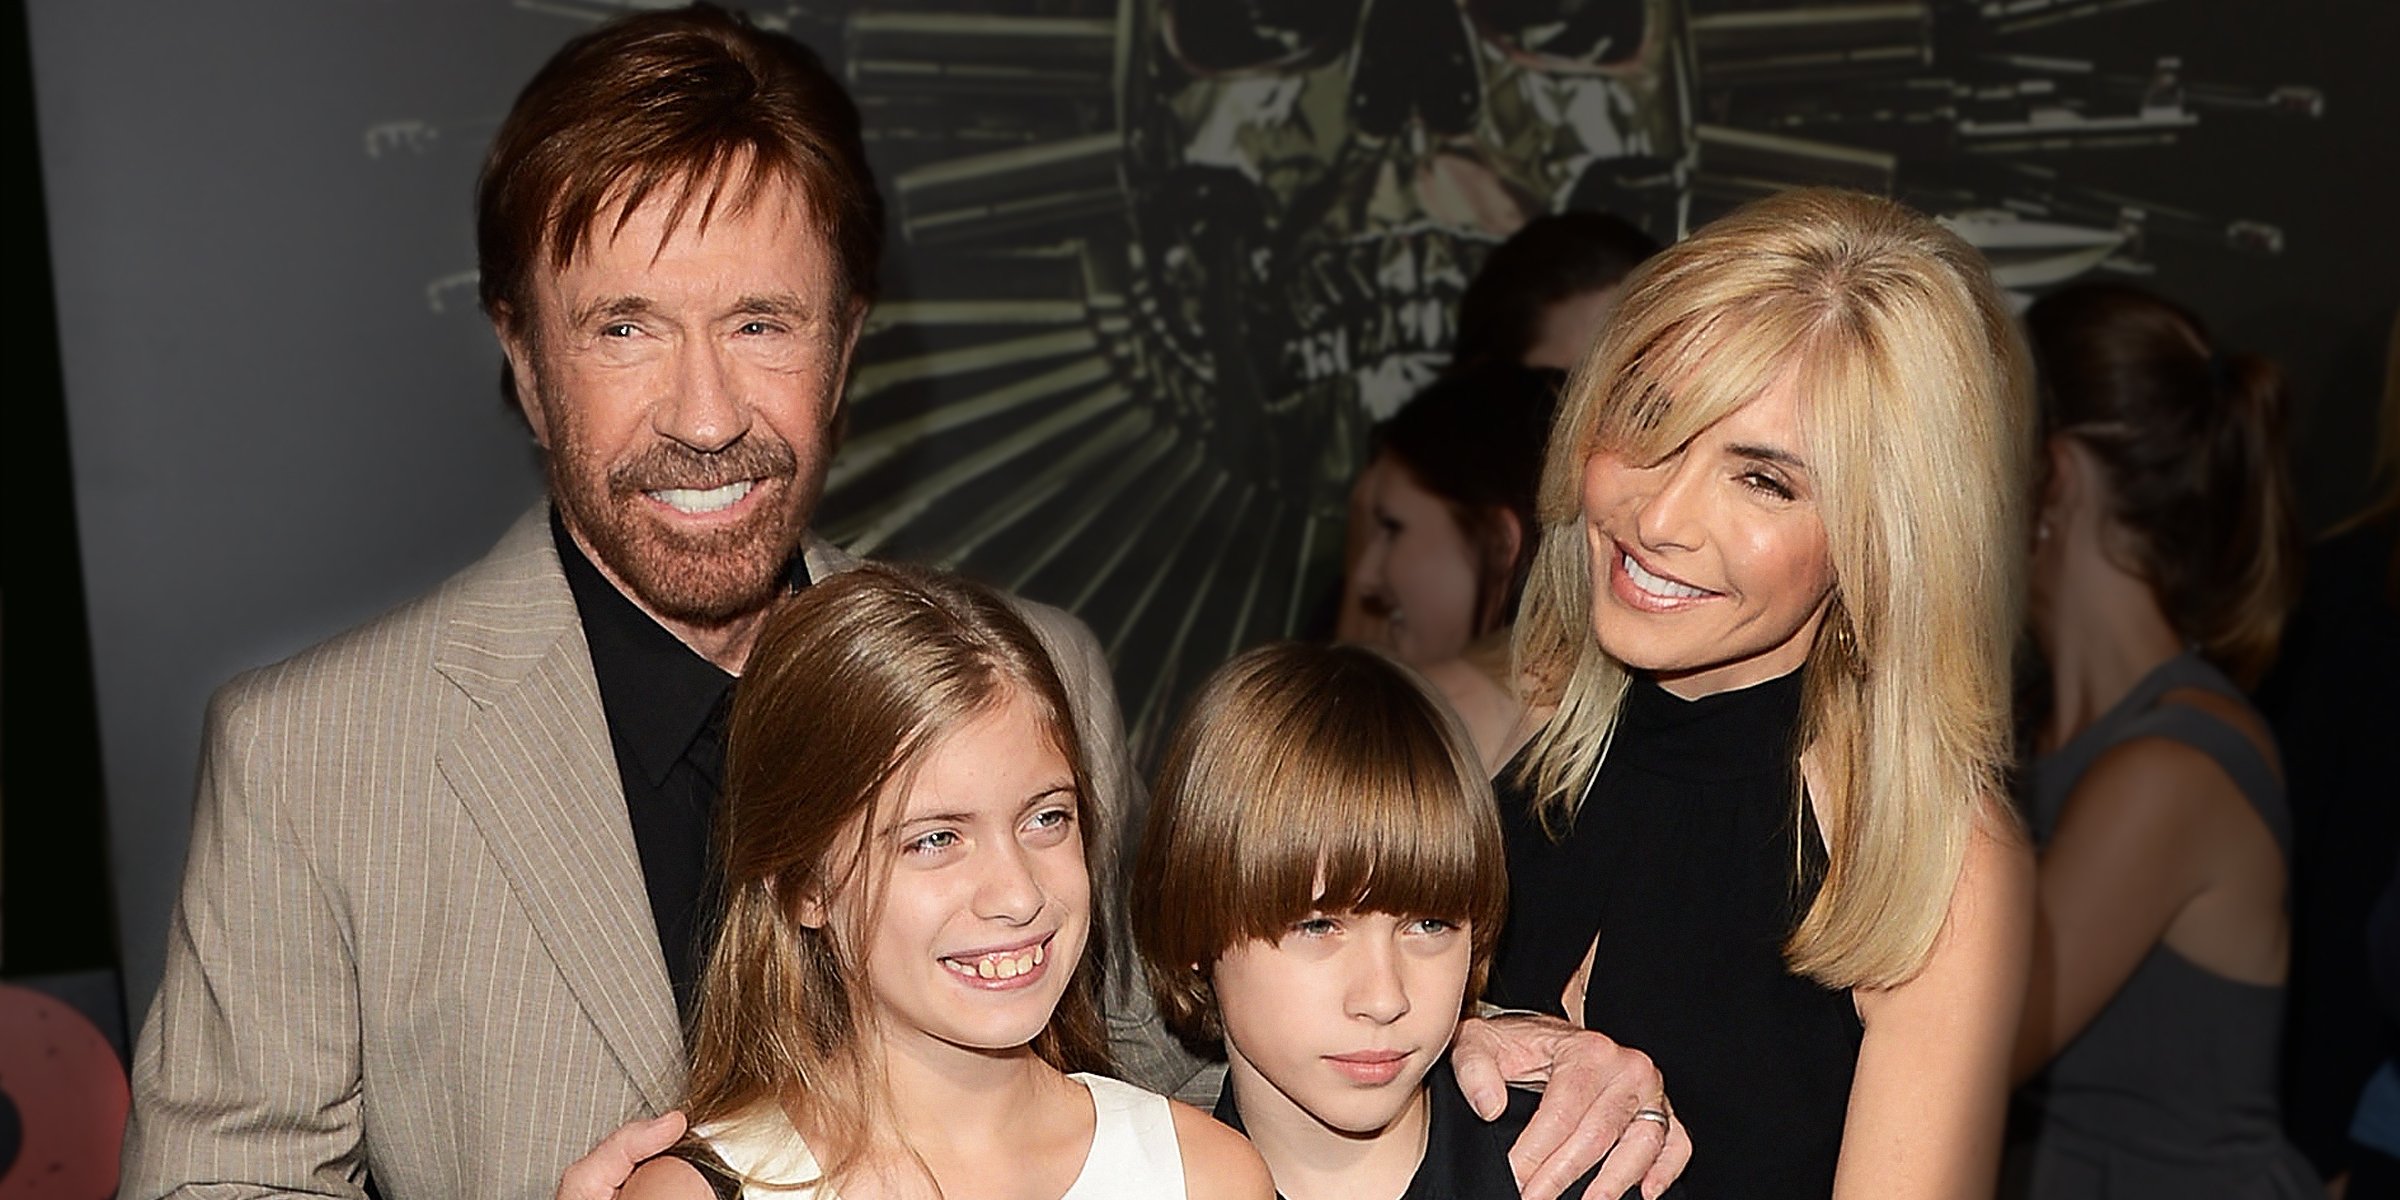 Chuck Norris Is Close to Family As Dad of 5 He's 'Very Proud' of His